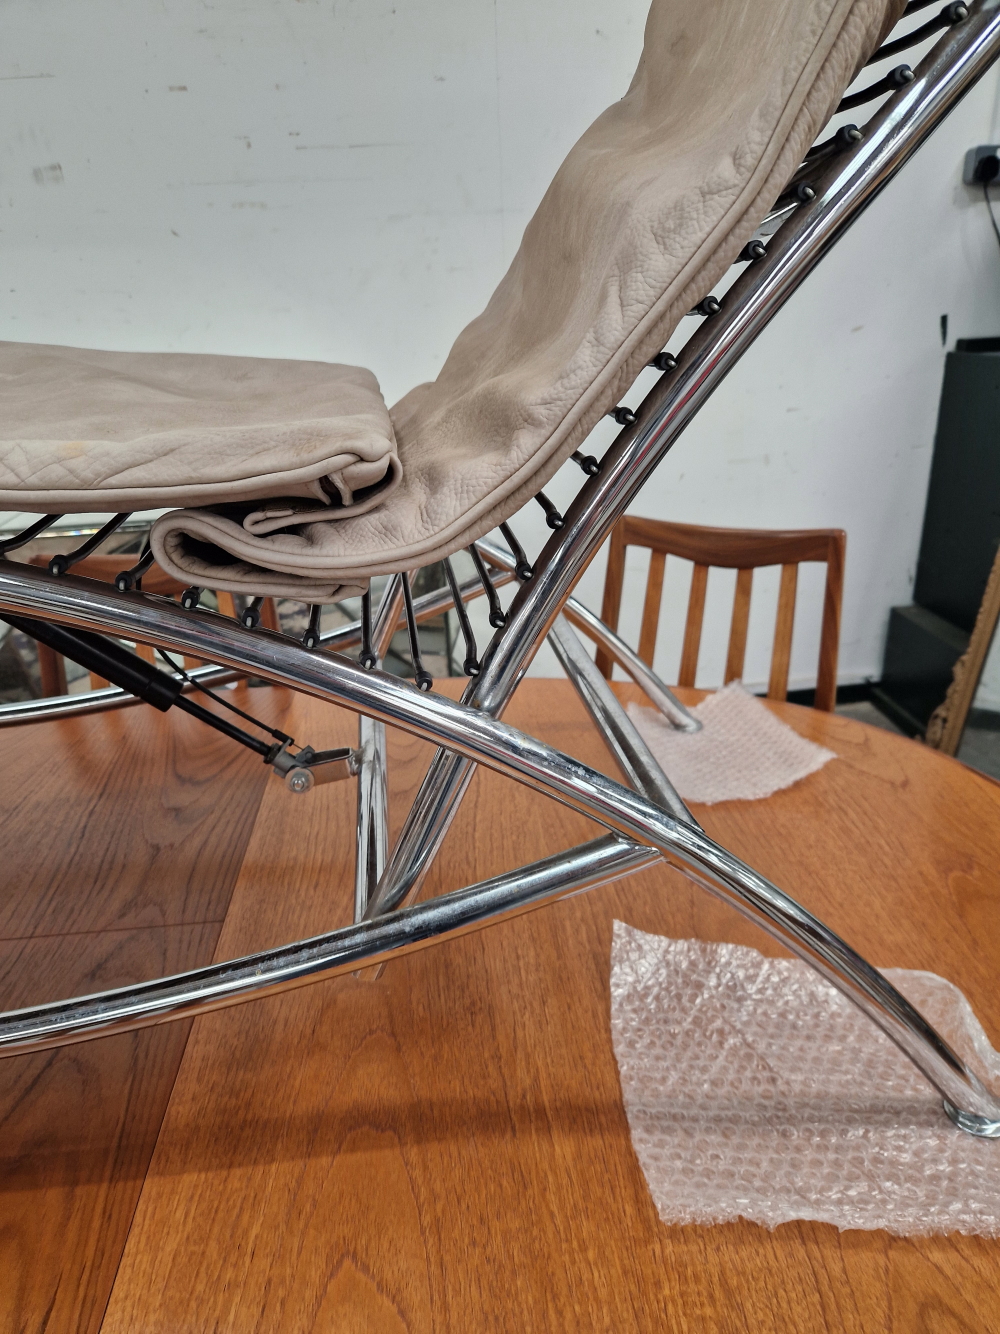 A CORBUSIER STYLE CHROME LOUNGER WITH LOOSE CUSHIONS. - Image 5 of 6